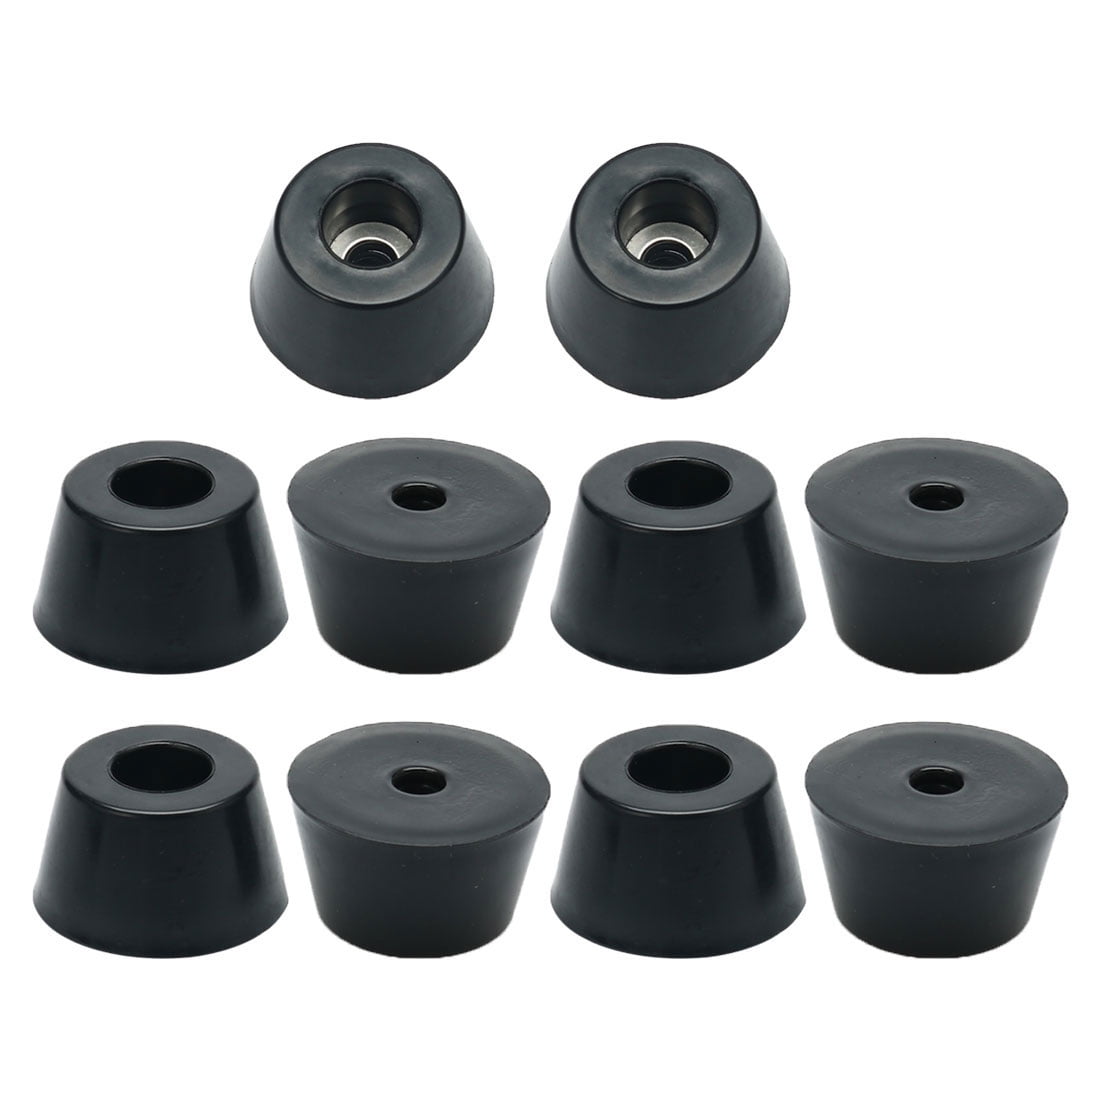 Etc Various Sizes Premium Rubber Foot Pad Recessed Steel Washer Wear Resistance 